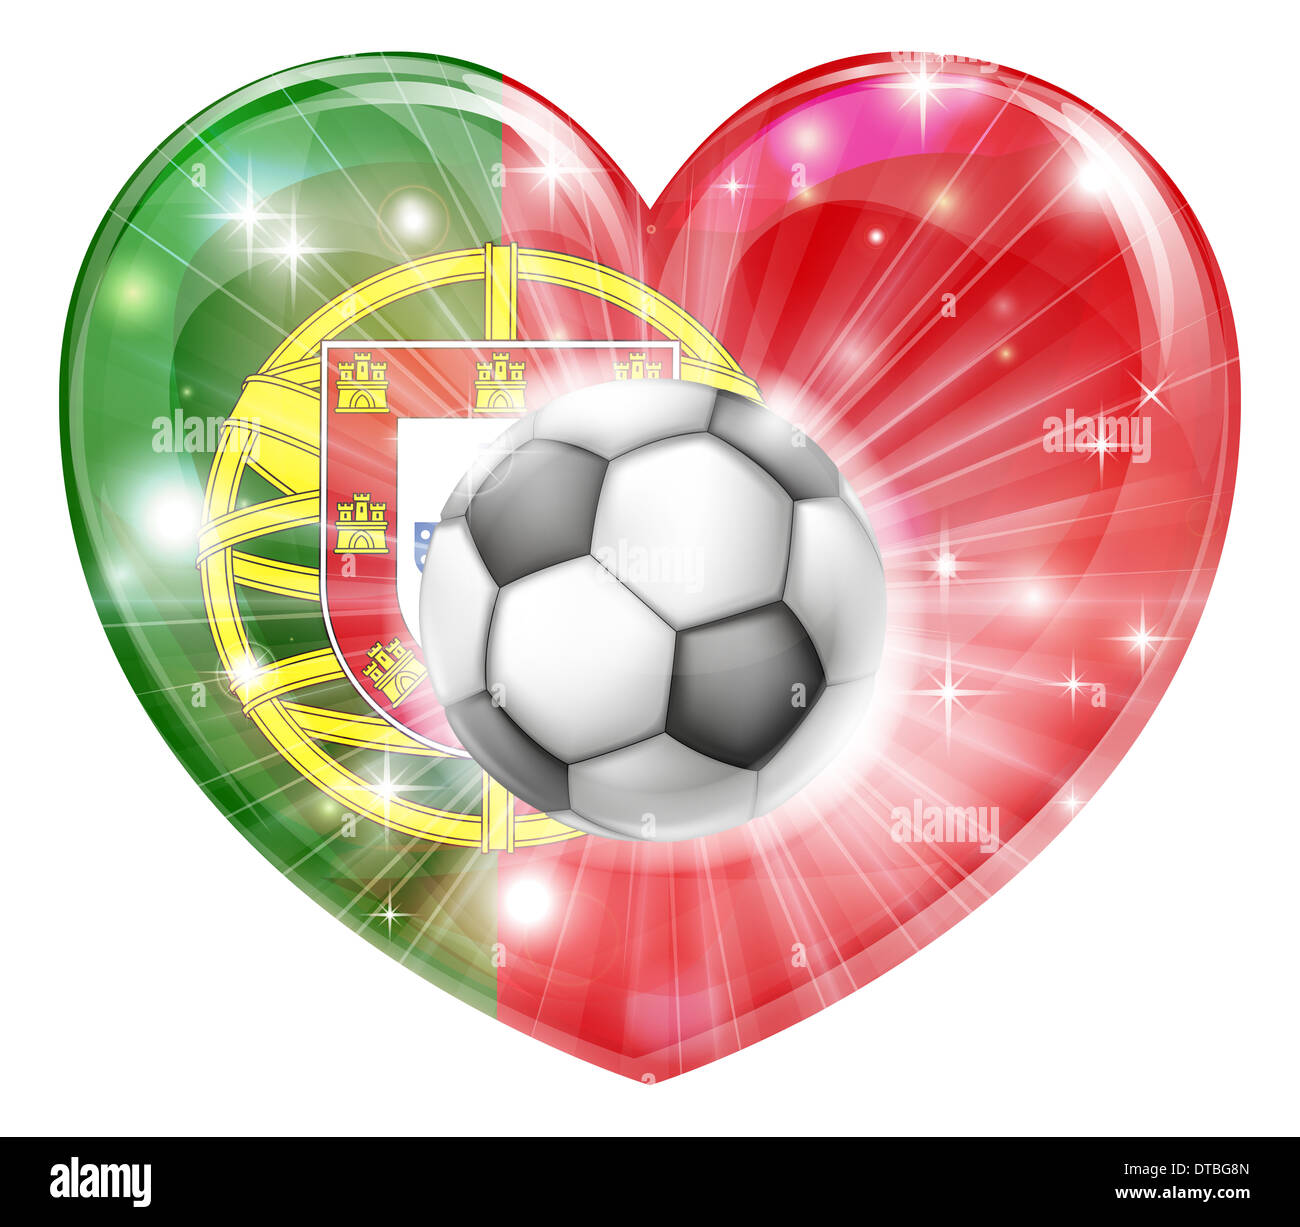 Portugal soccer football ball flag love heart concept with the Portuguese flag in a heart shape and a soccer ball flying out Stock Photo